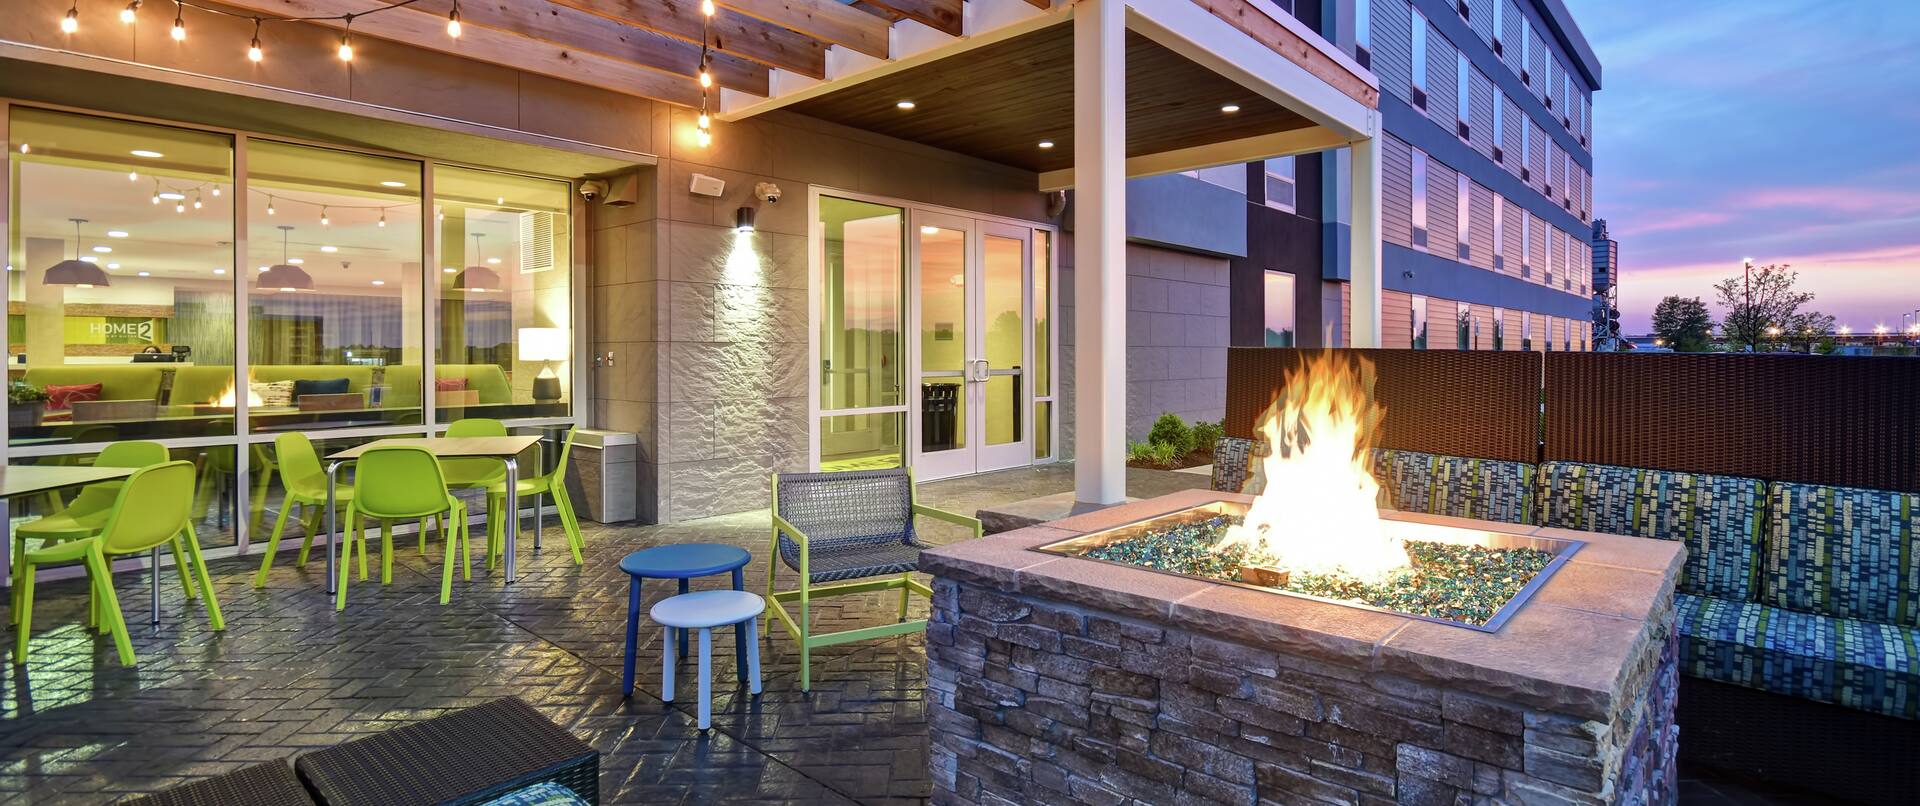 Outdoor firepit with tables and chairs